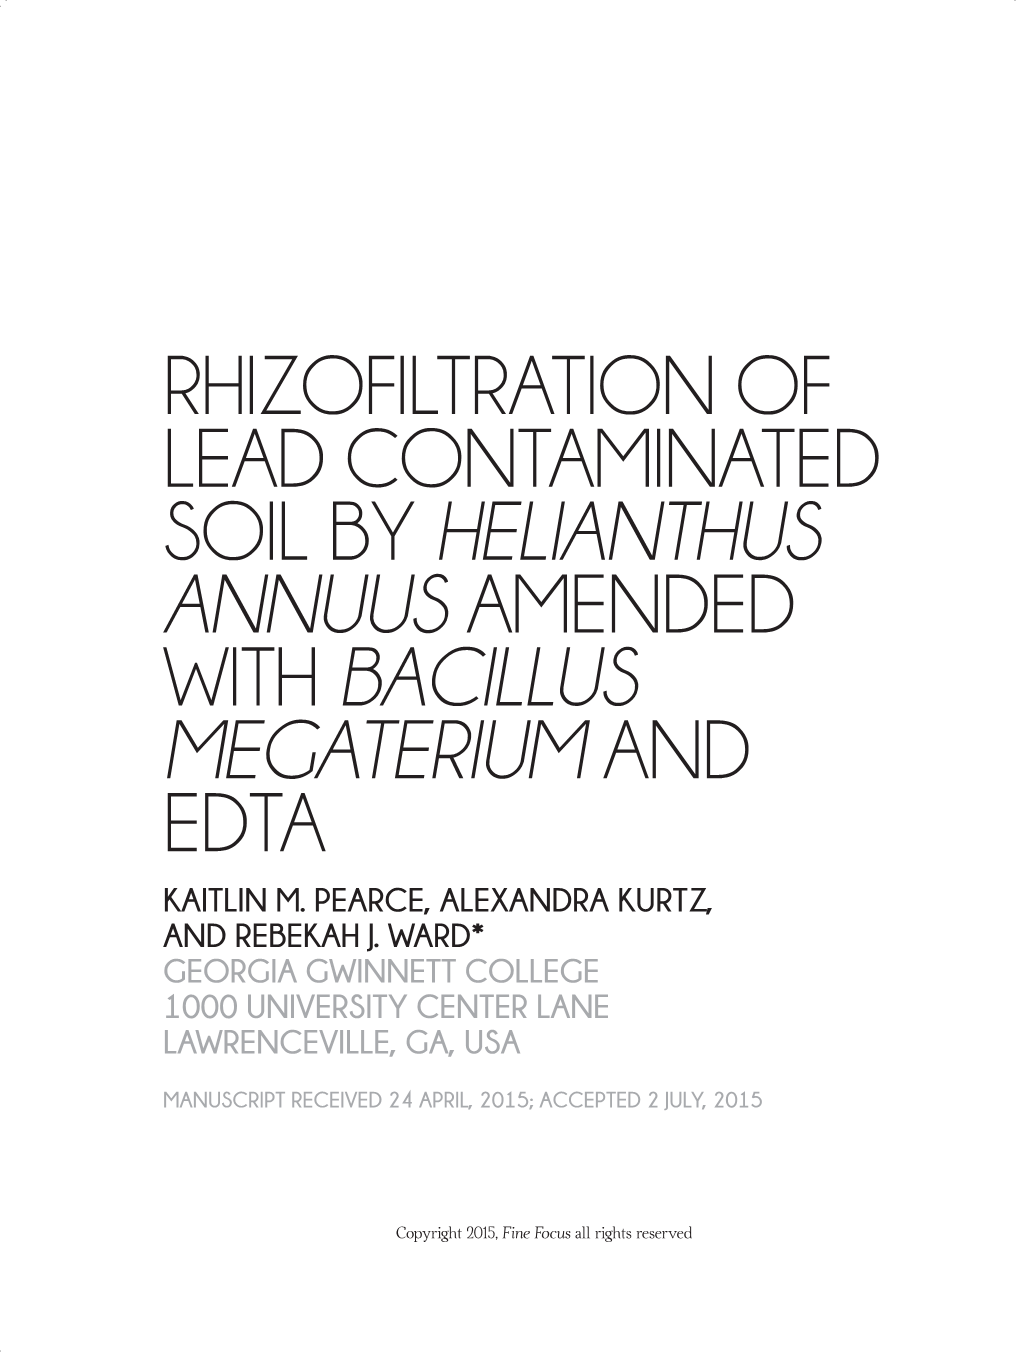 Rhizofiltration of Lead Contaminated Soil by Helianthus Annuus Amended with Bacillus Megaterium and Edta Kaitlin M